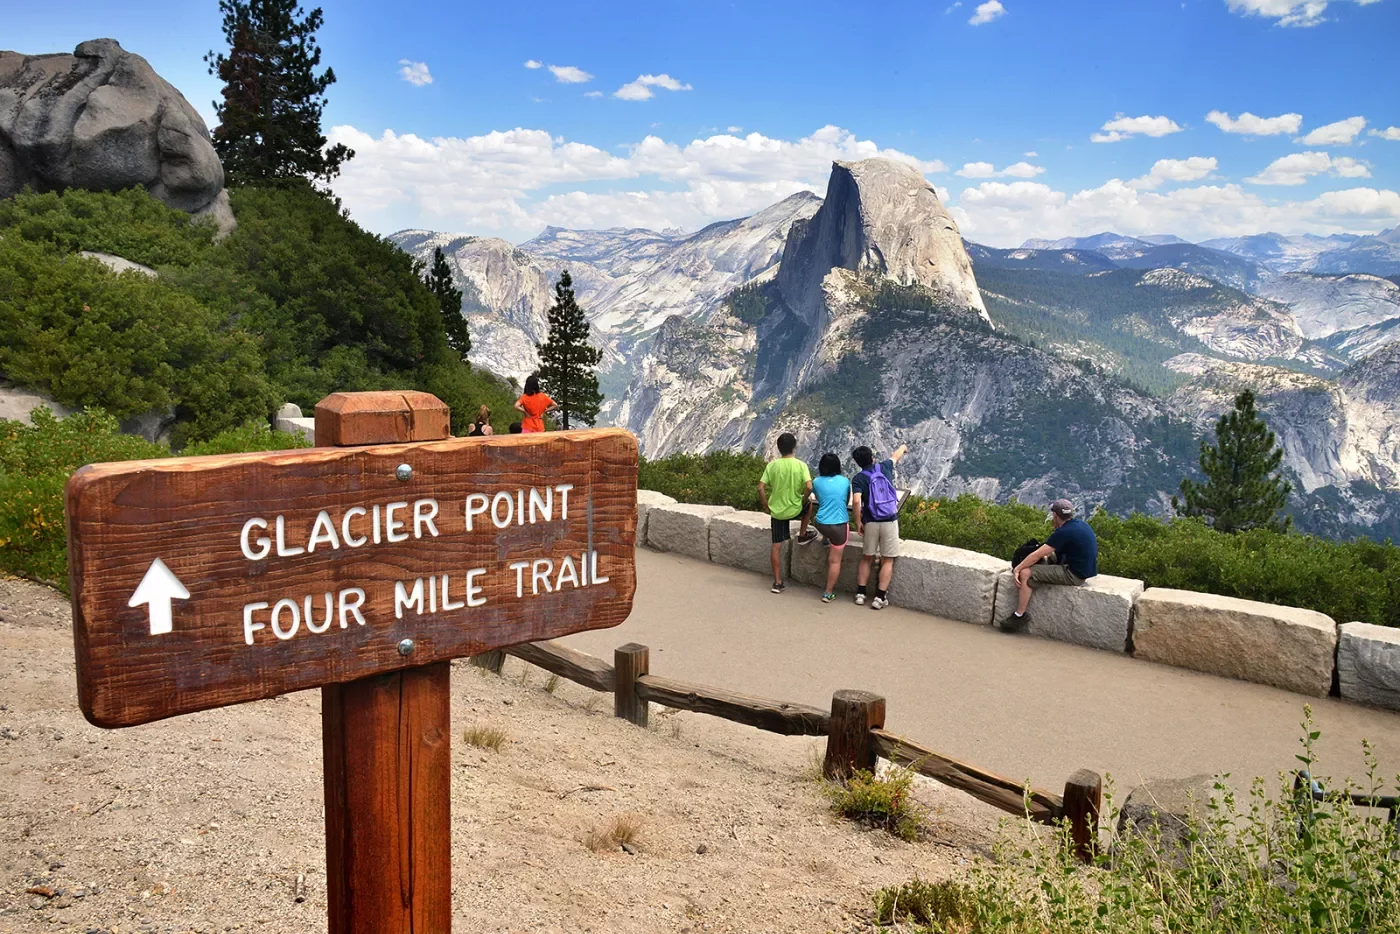 &quot;GLACIER POINT&quot; sign in foreground, guests and mountain in background.